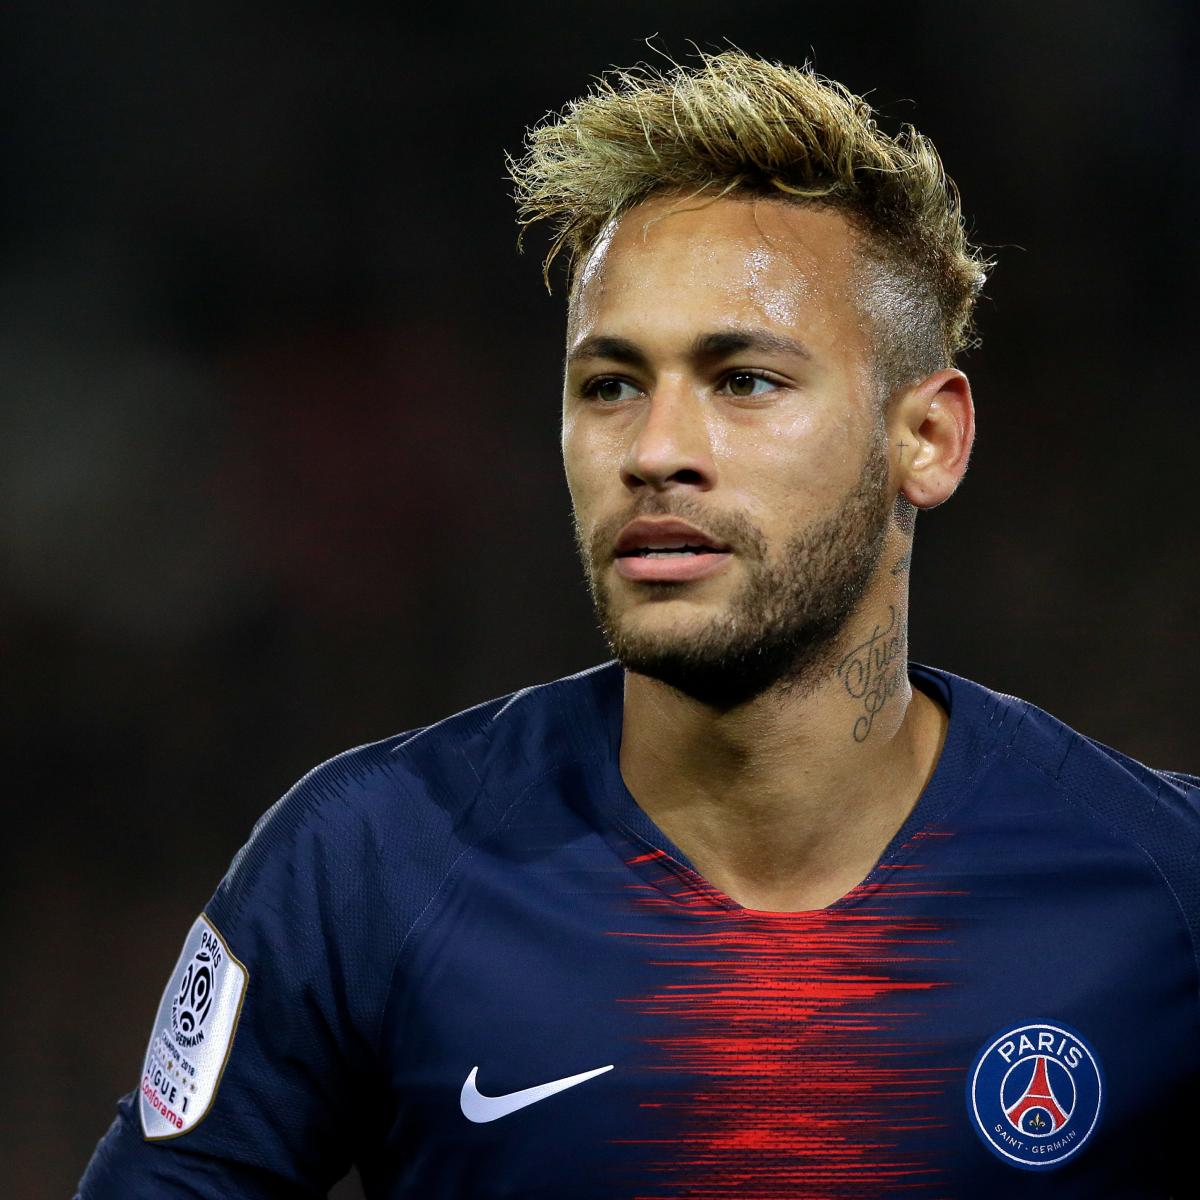  Neymar  Can Reportedly Leave PSG for 220M Next Summer Amid 